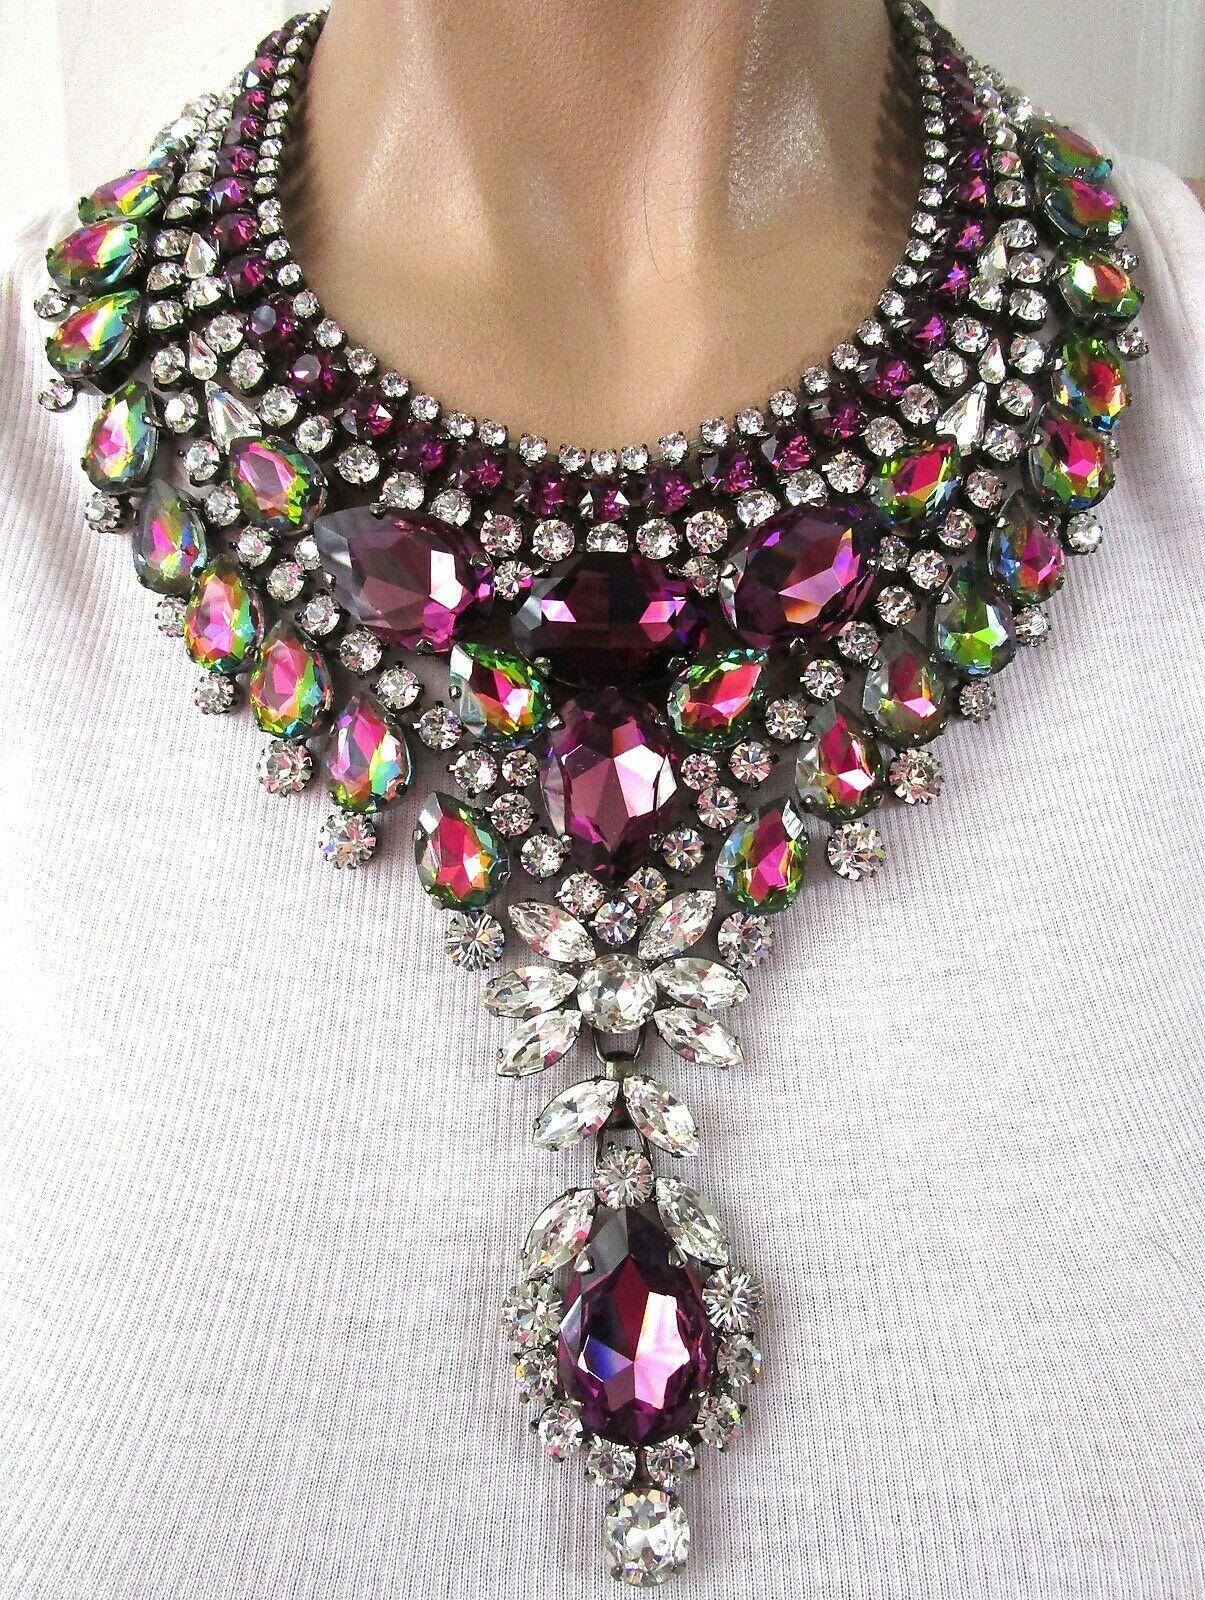 RARE THORIN & CO Opulent Designer Bib Necklace. Hand set with Sparkling Purple, Watermelon and Ice Crystals. Dark silver tone mounting. Necklace measures approx. 21